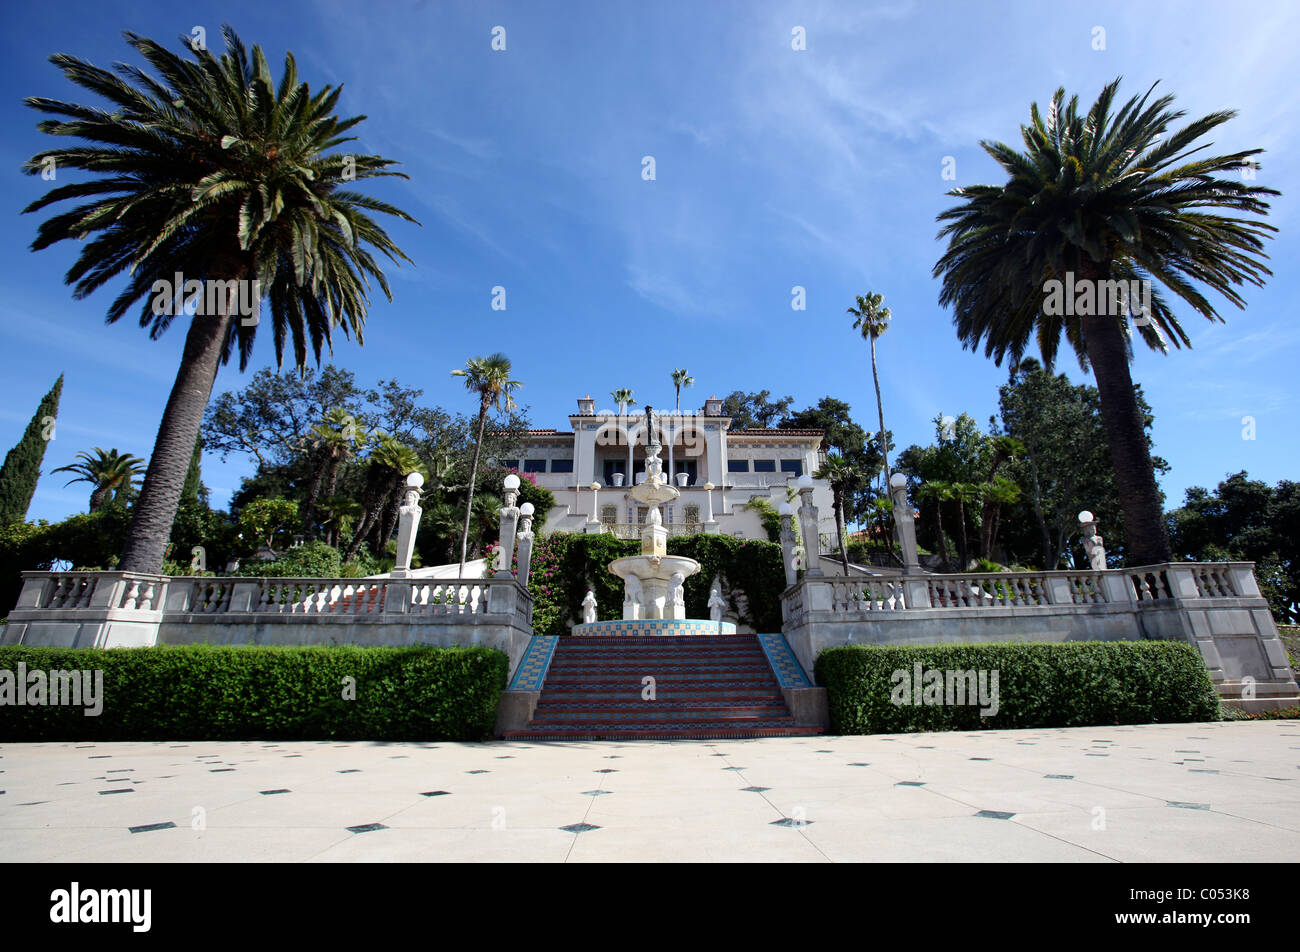 The courtyards of the Hearst Castle near San Simeon, California, where newspaper magnate William Randolph Hearst once lived. Stock Photo